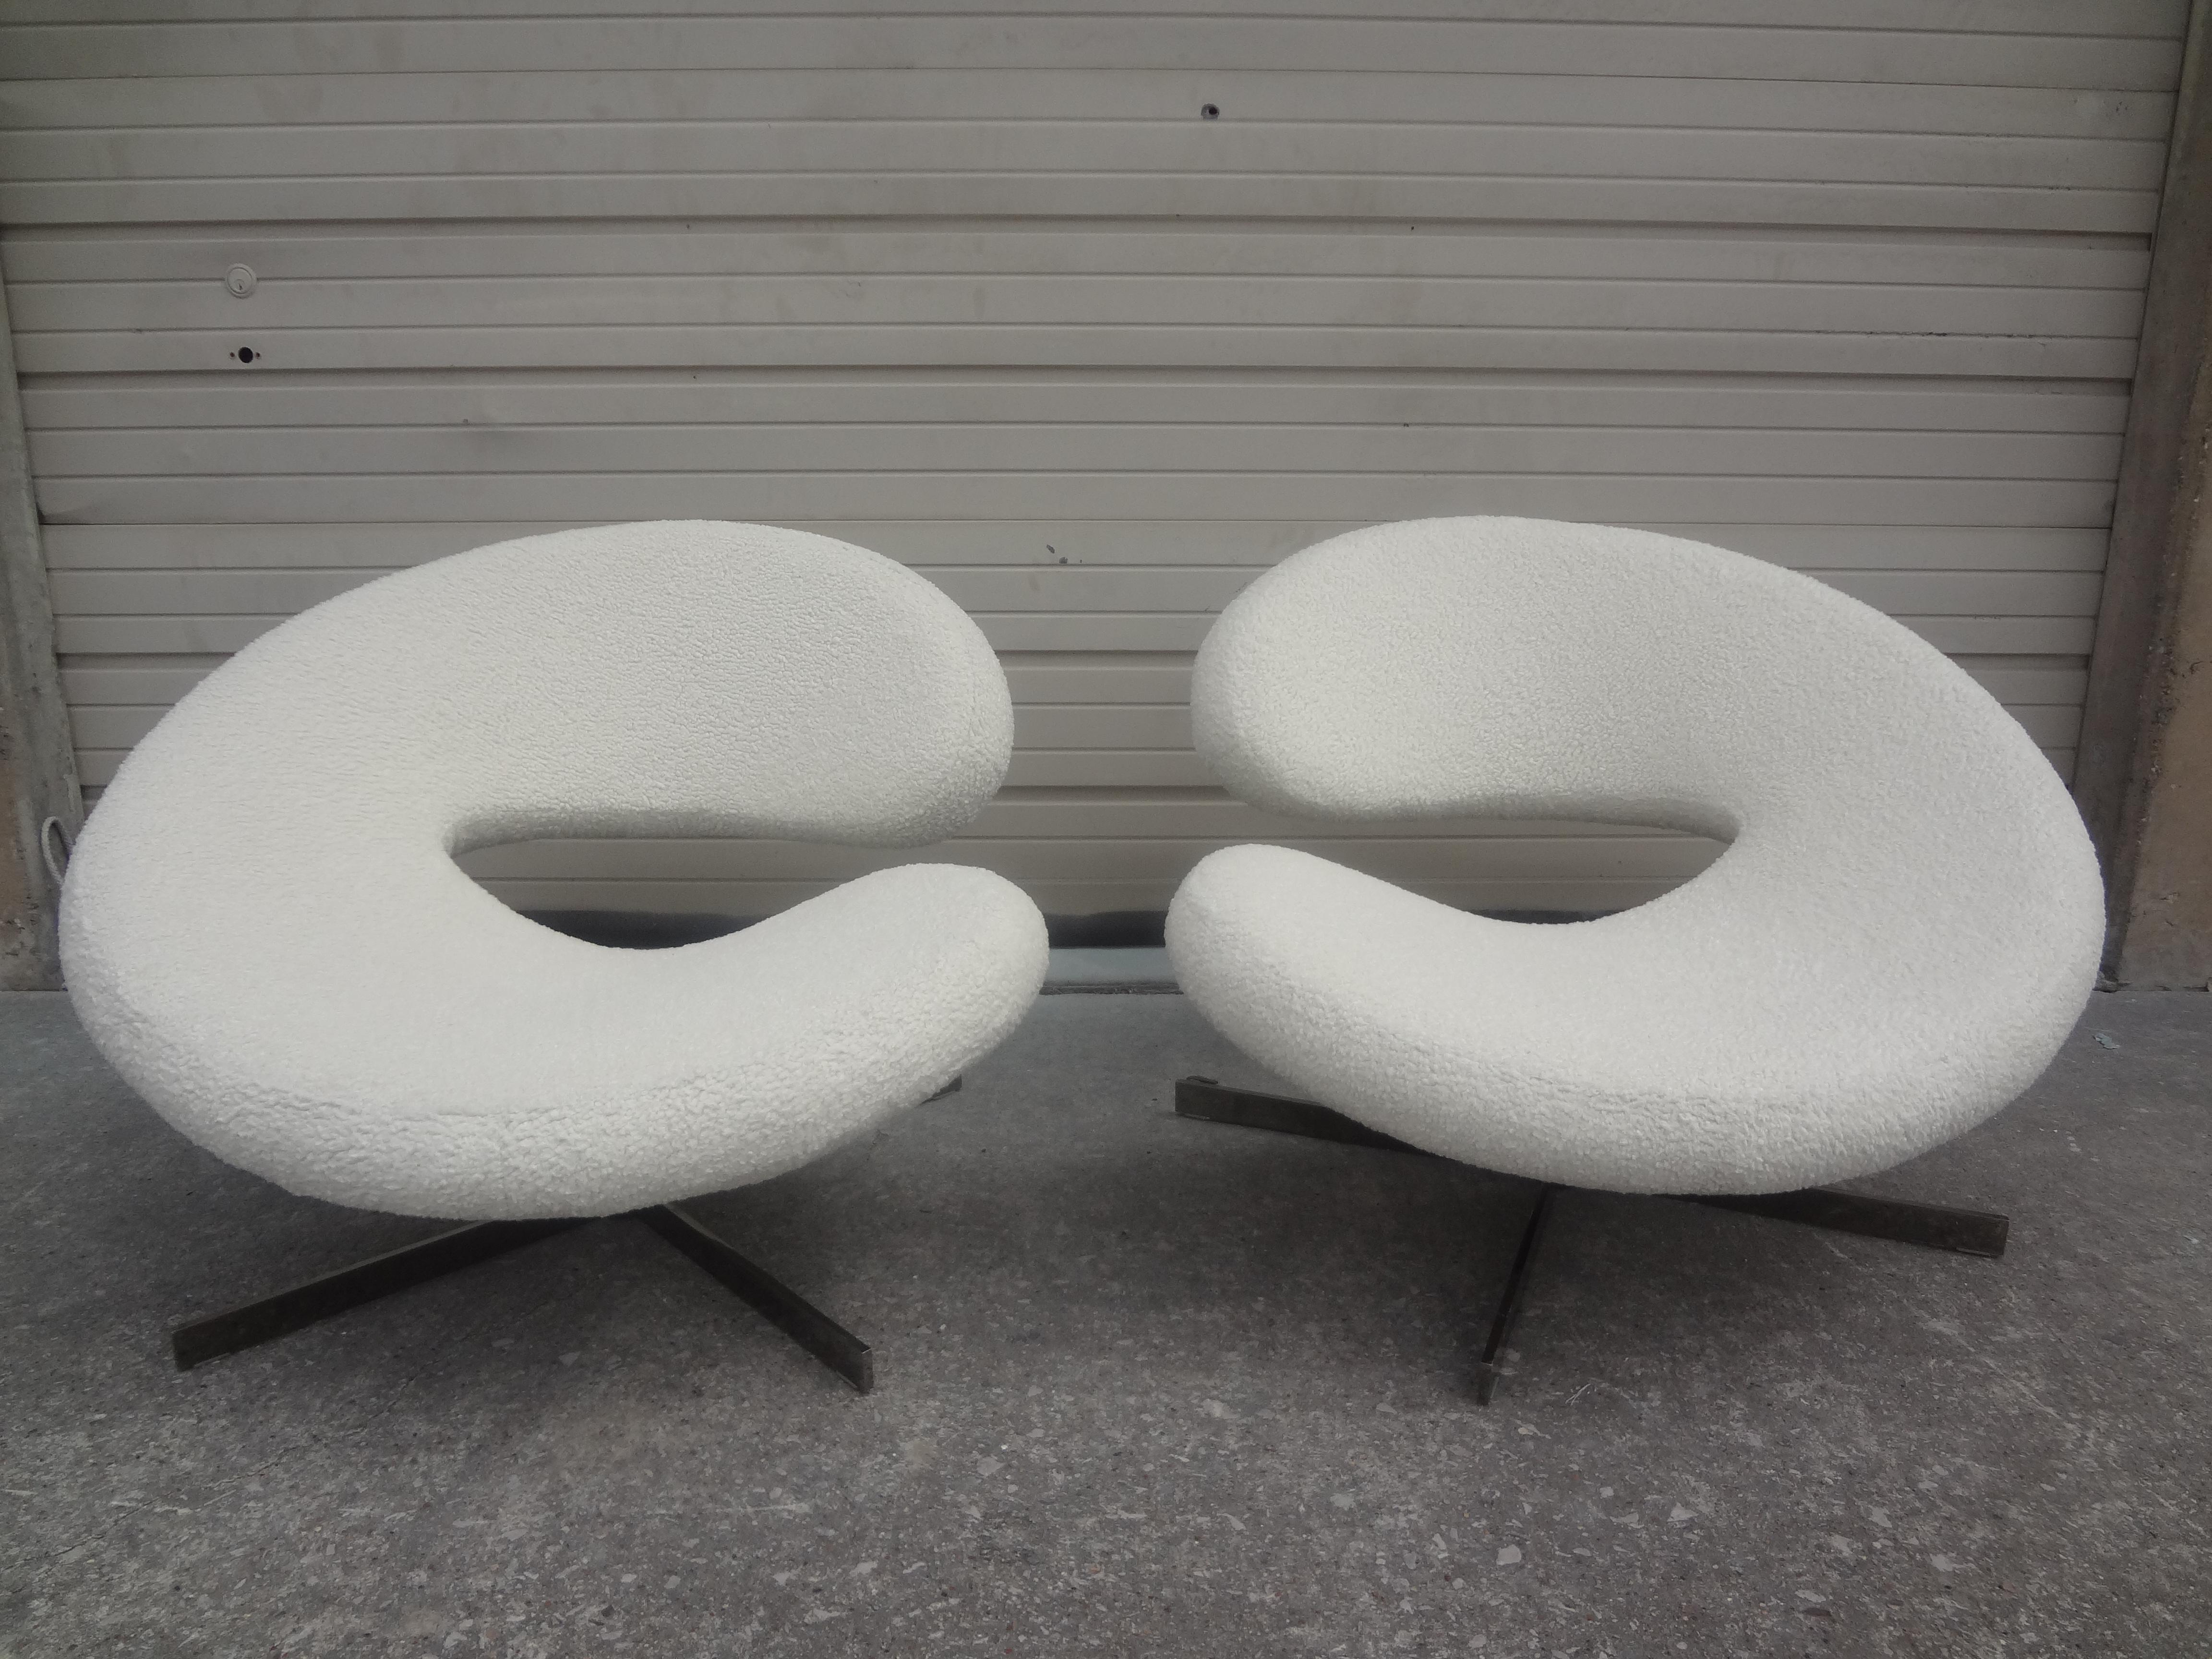 Pair of French Modernist Sculptural Swivel Chairs by Roche Bobois For Sale 7